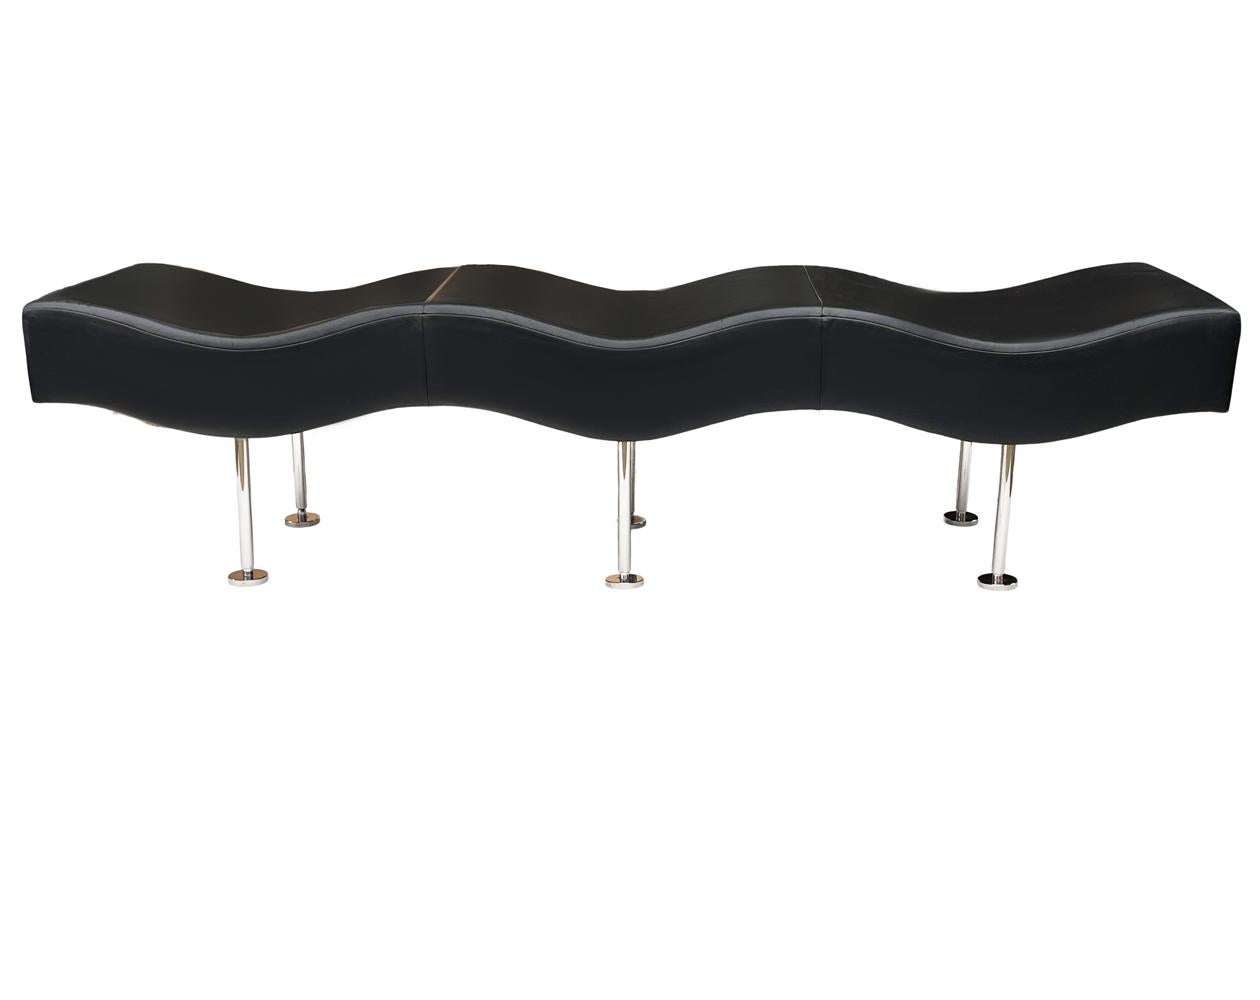 An extra long contemporary design produced by Brueton in the 1990's. It consists of a wavy design, black leather upholstery, and stainless steel legs. Leather has some small cuts and edge wear, so recovering is recommended.